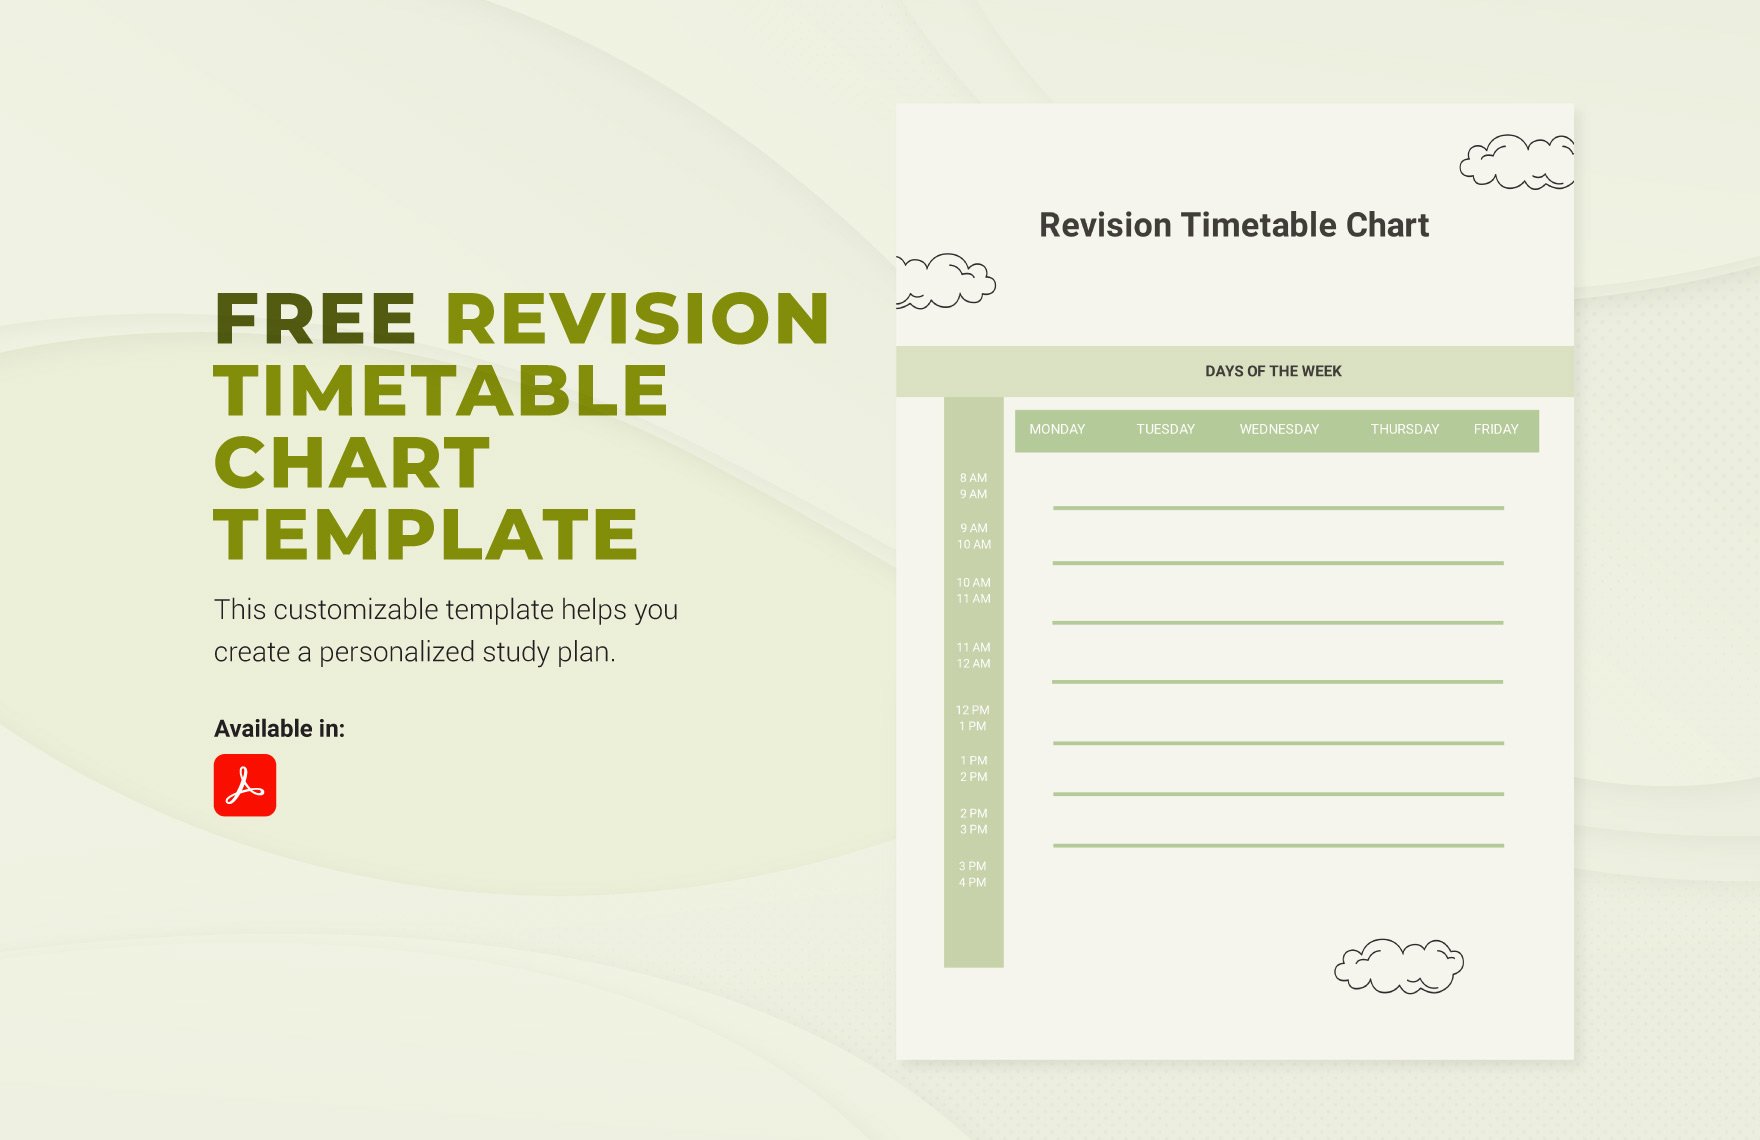 Revision Timetable Chart Template